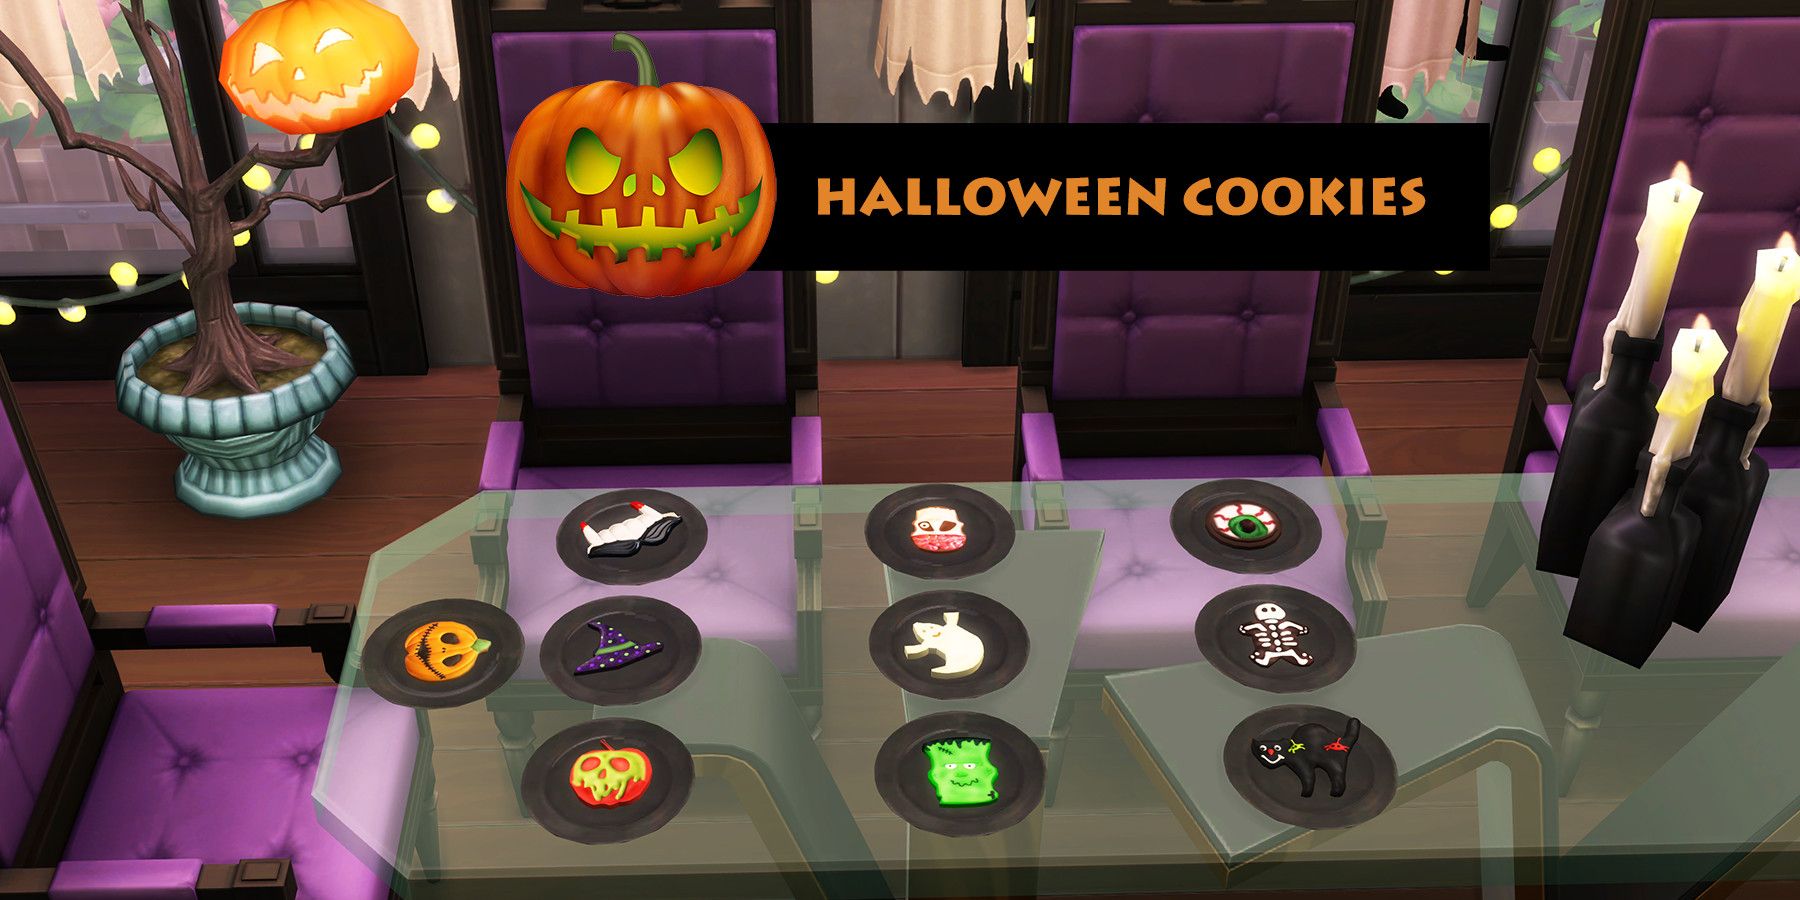 Screenshot of a room in The Sims 4 decorated with a Halloween theme. On the table sit several decorated Halloween-themed sugar cookies.